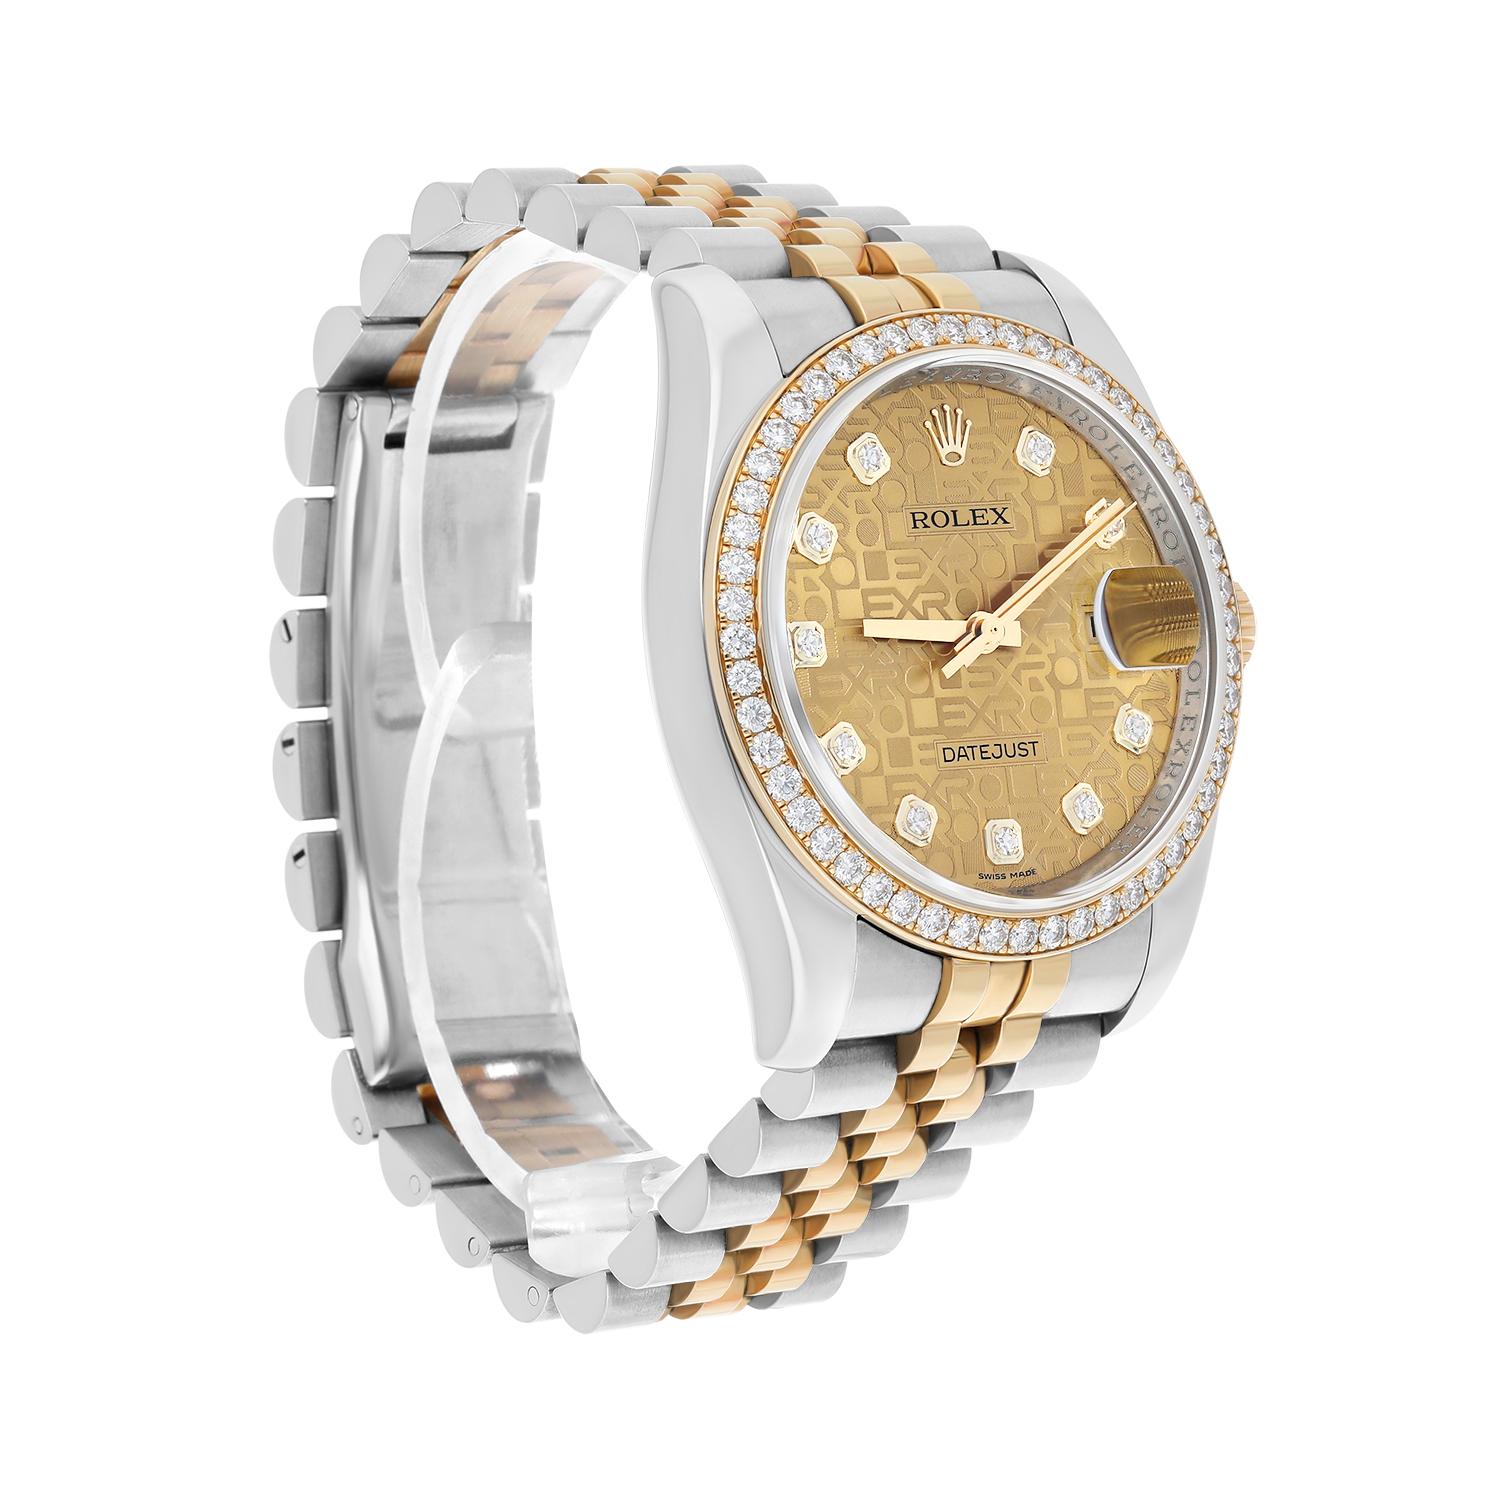 Rolex Datejust 36mm Yellow Gold & Steel Champagne Jubilee Diamond Dial 116243 In Excellent Condition For Sale In New York, NY